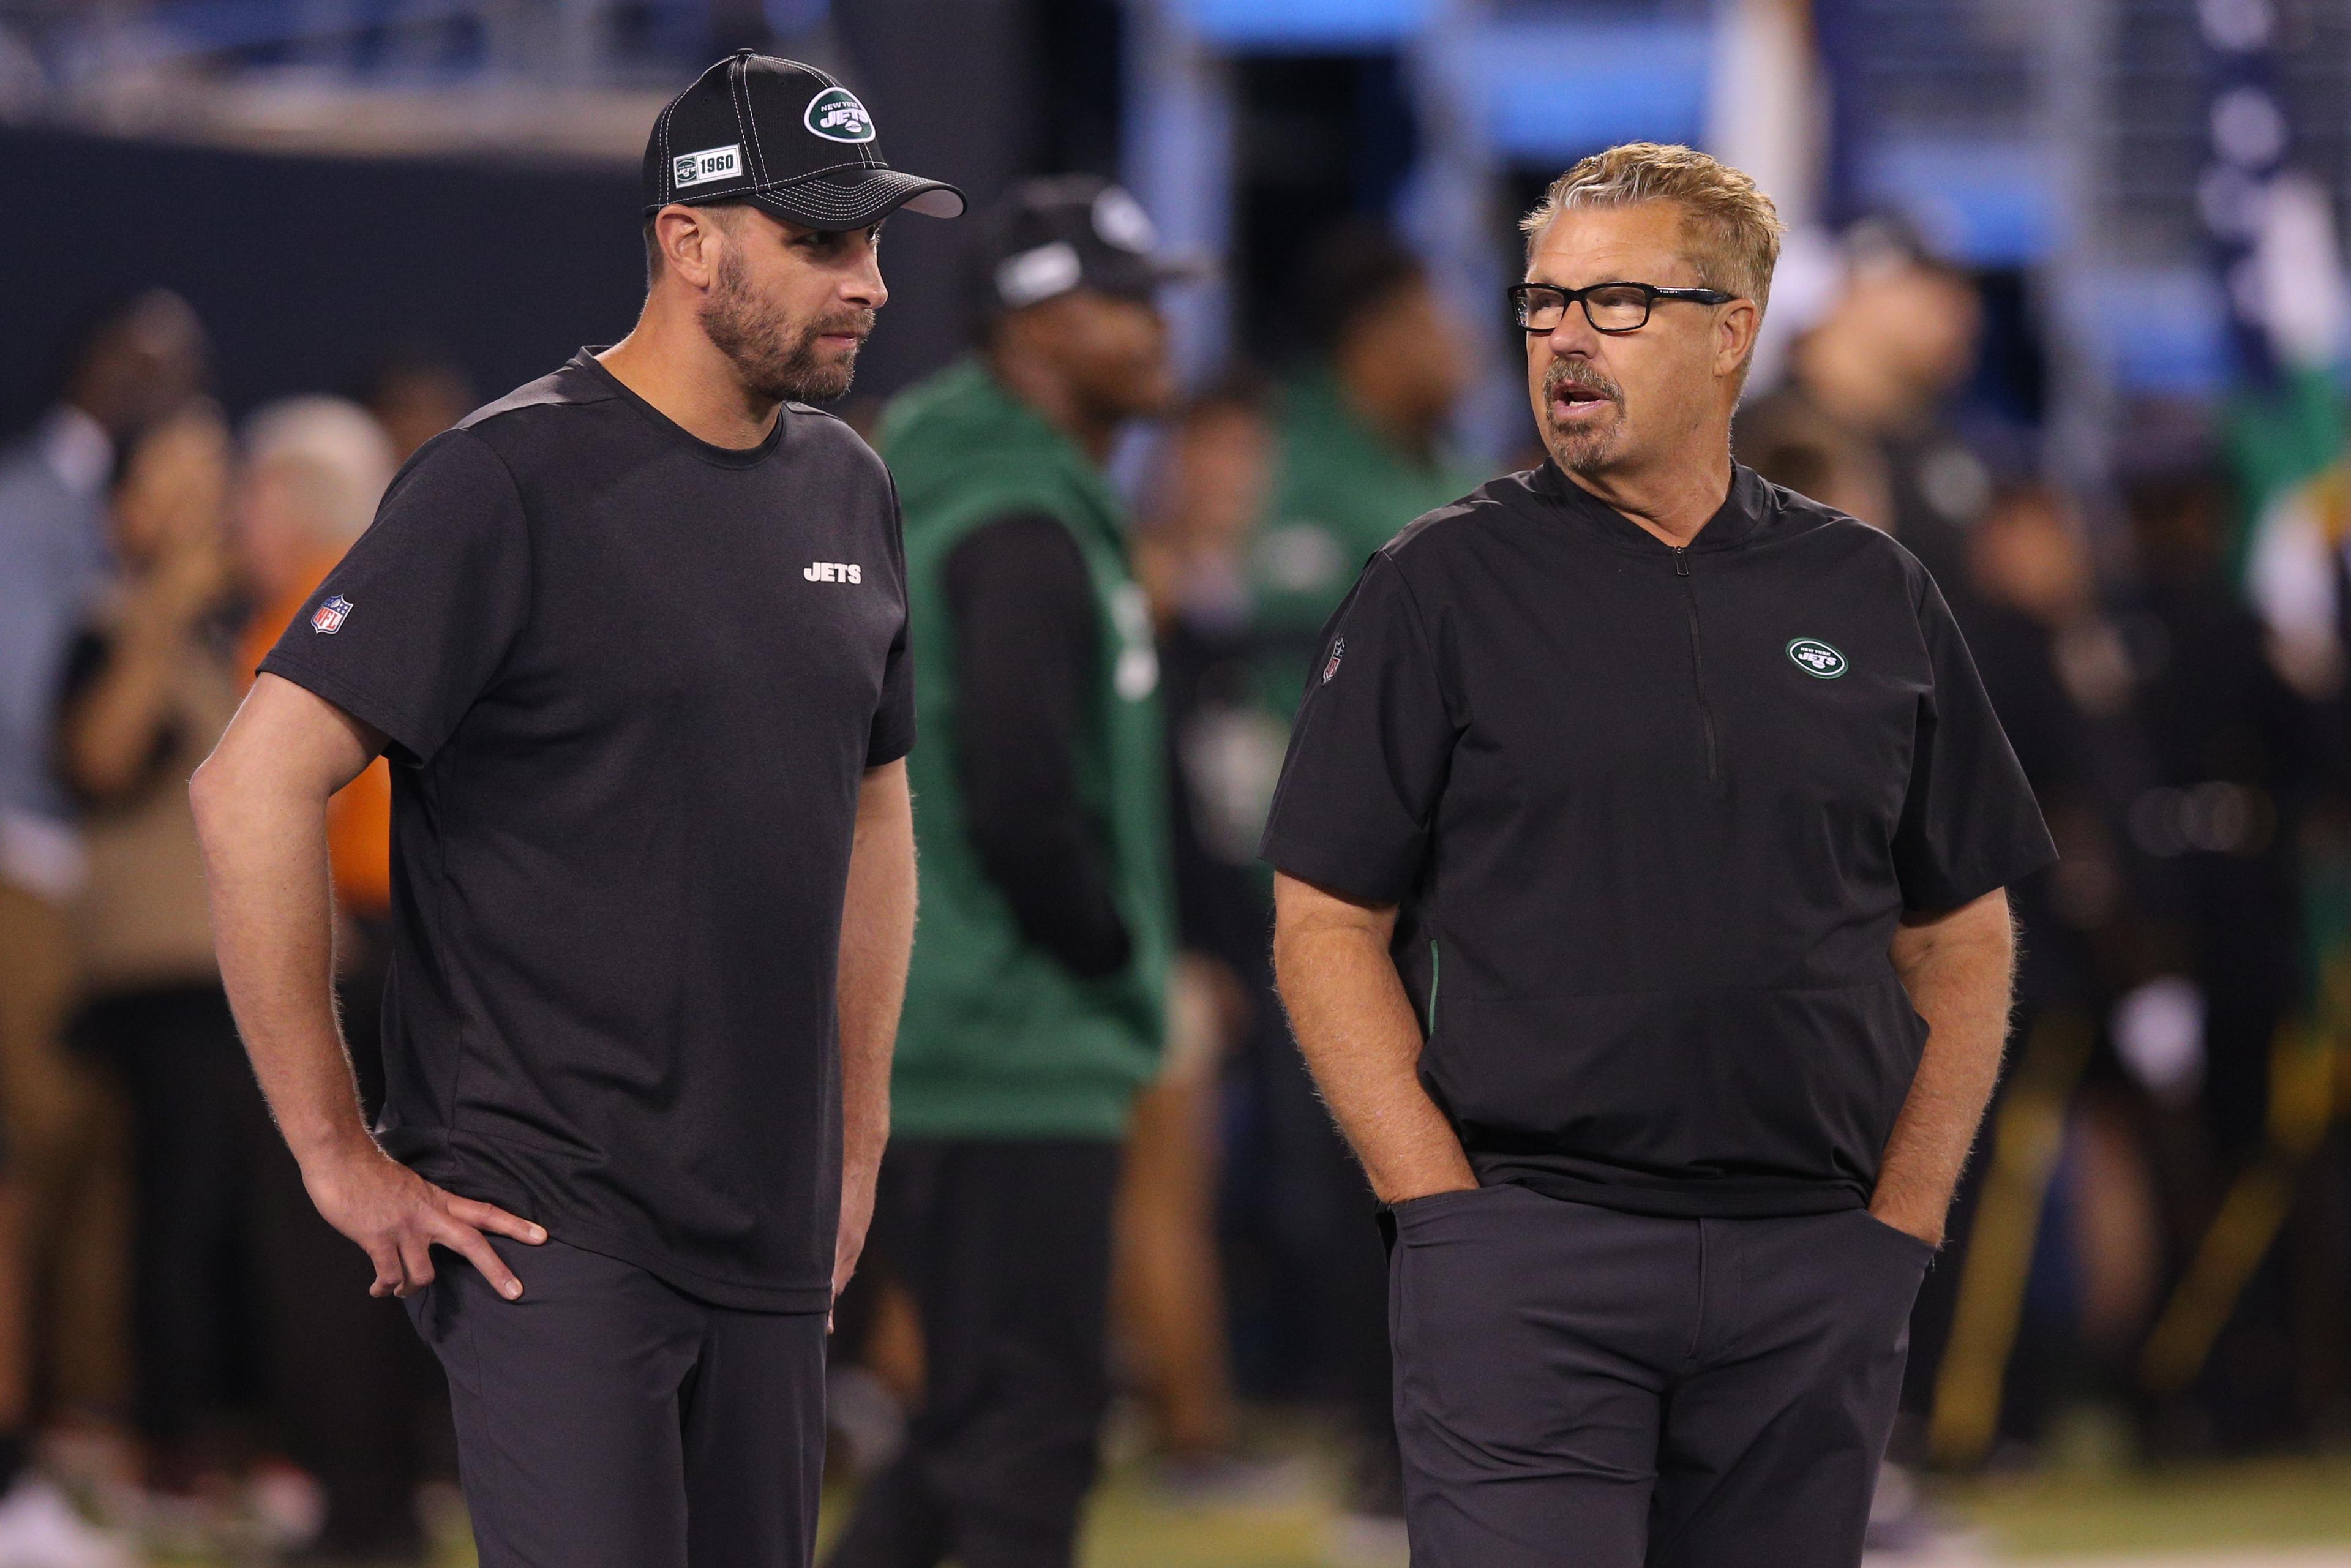 Sep 16, 2019; East Rutherford, NJ, USA; New York Jets head coach Adam Gase and defensive coordinator Gregg Williams talk on the field during warmups before a game against the Cleveland Browns at MetLife Stadium. / © Brad Penner-USA TODAY Sports